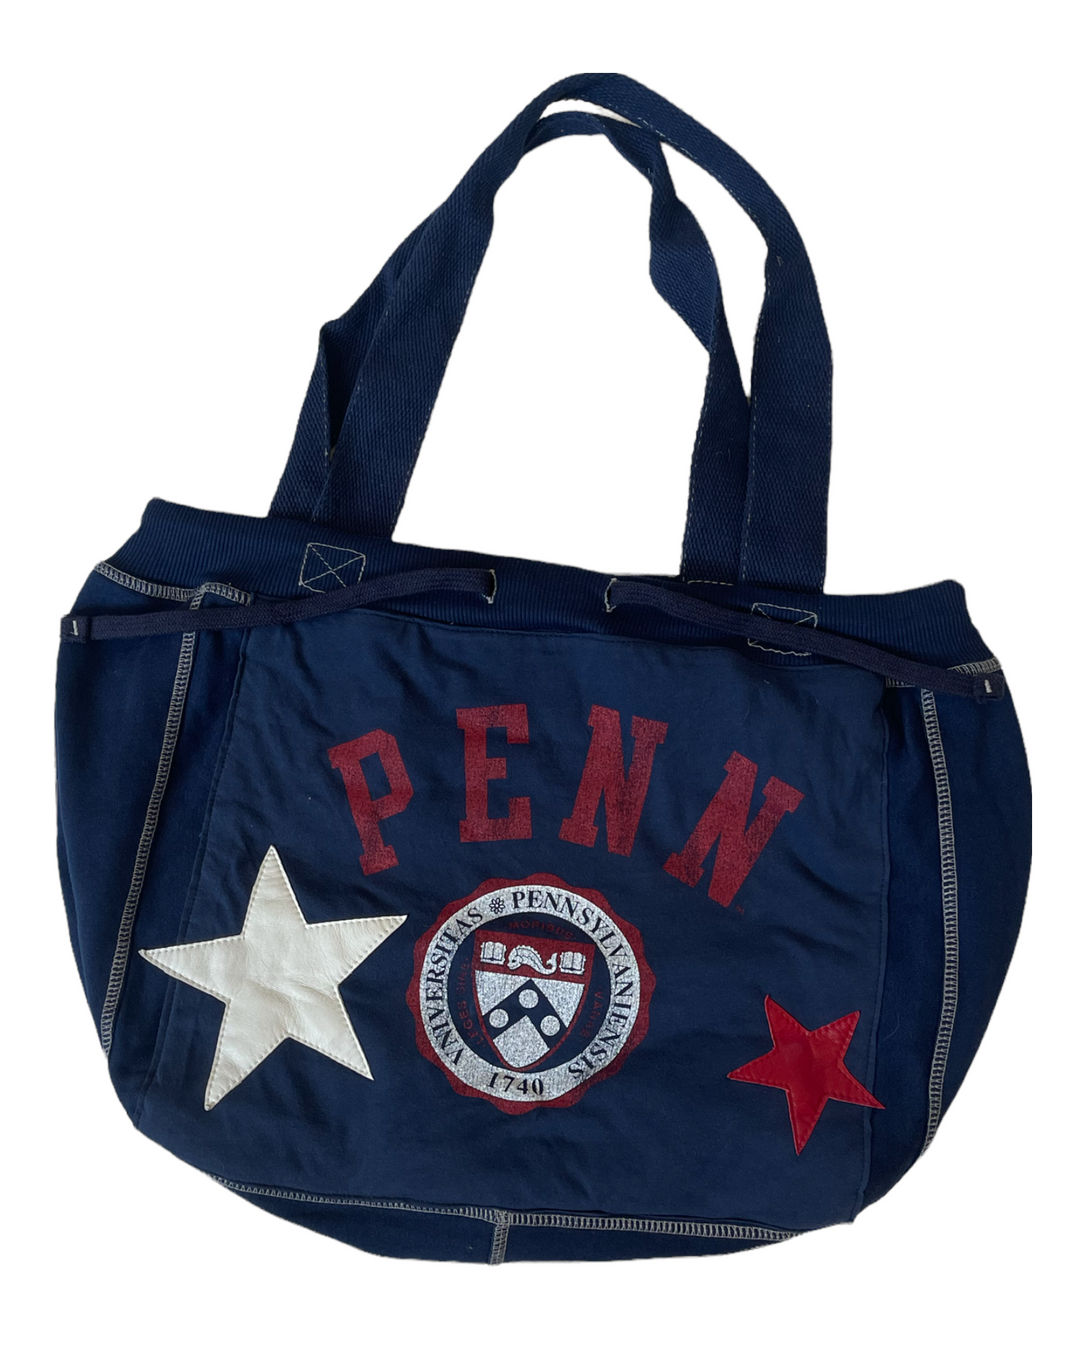 Patched Up UPenn Tote